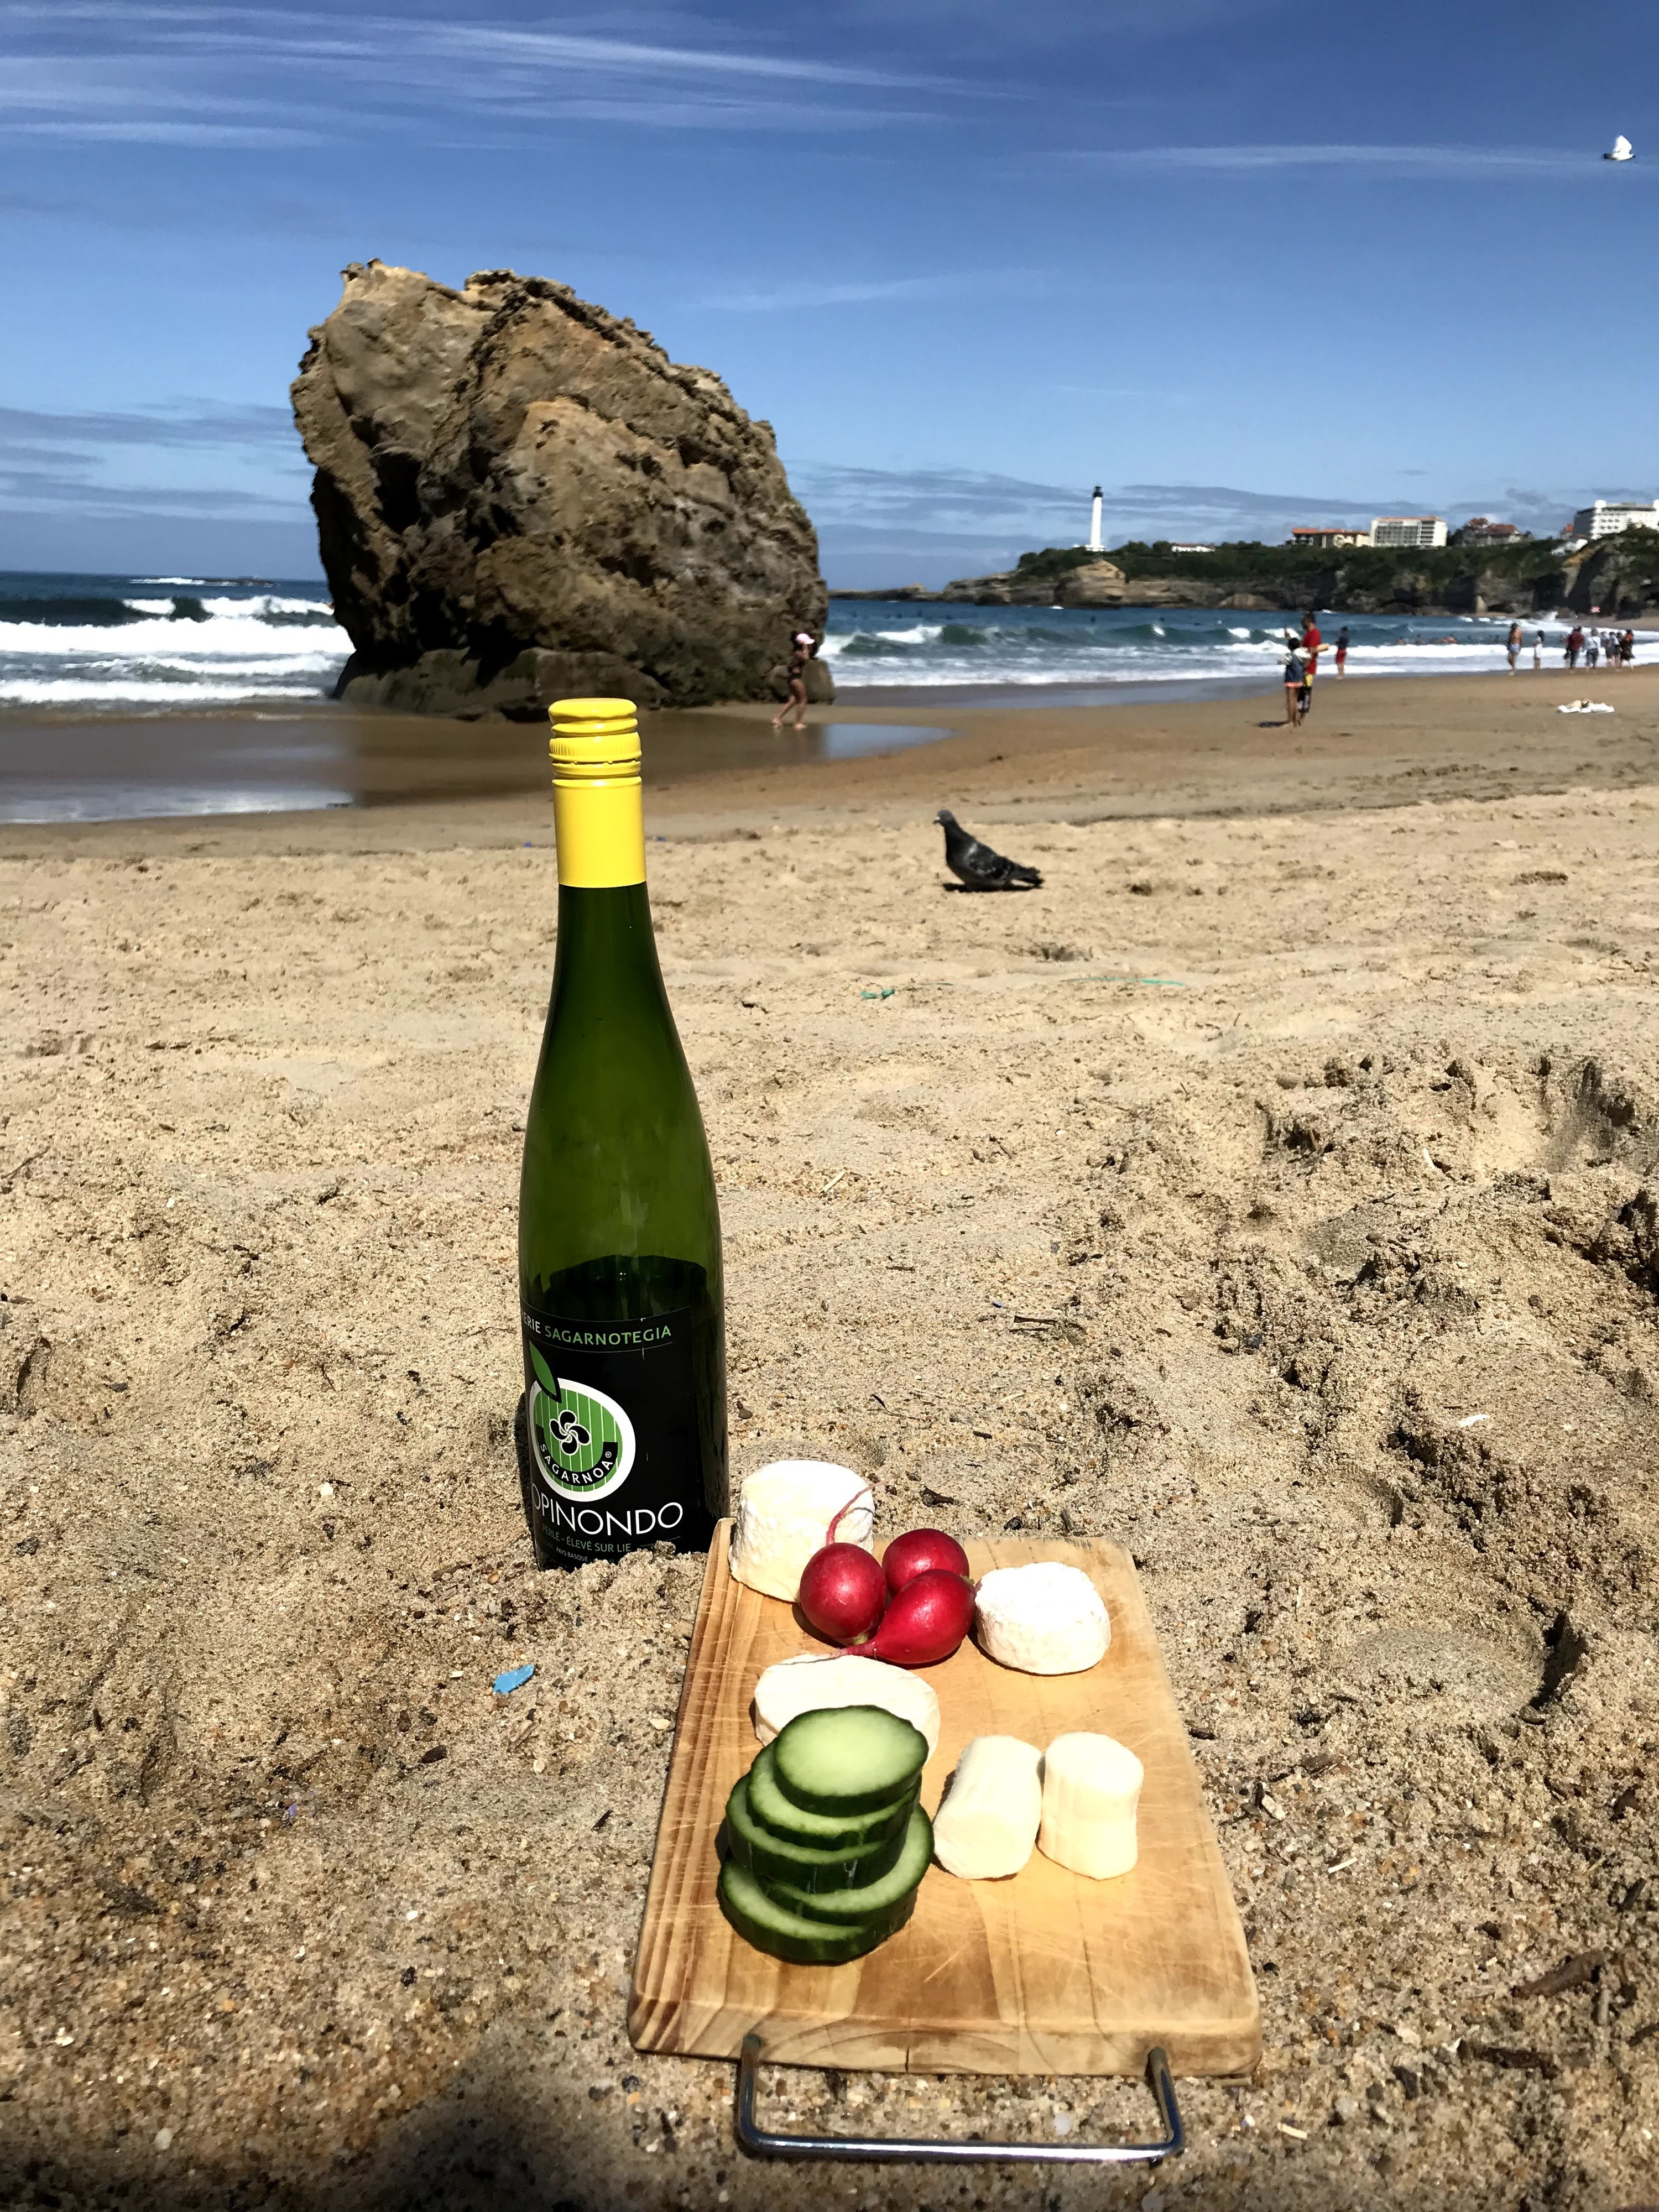 Lunch on the beach